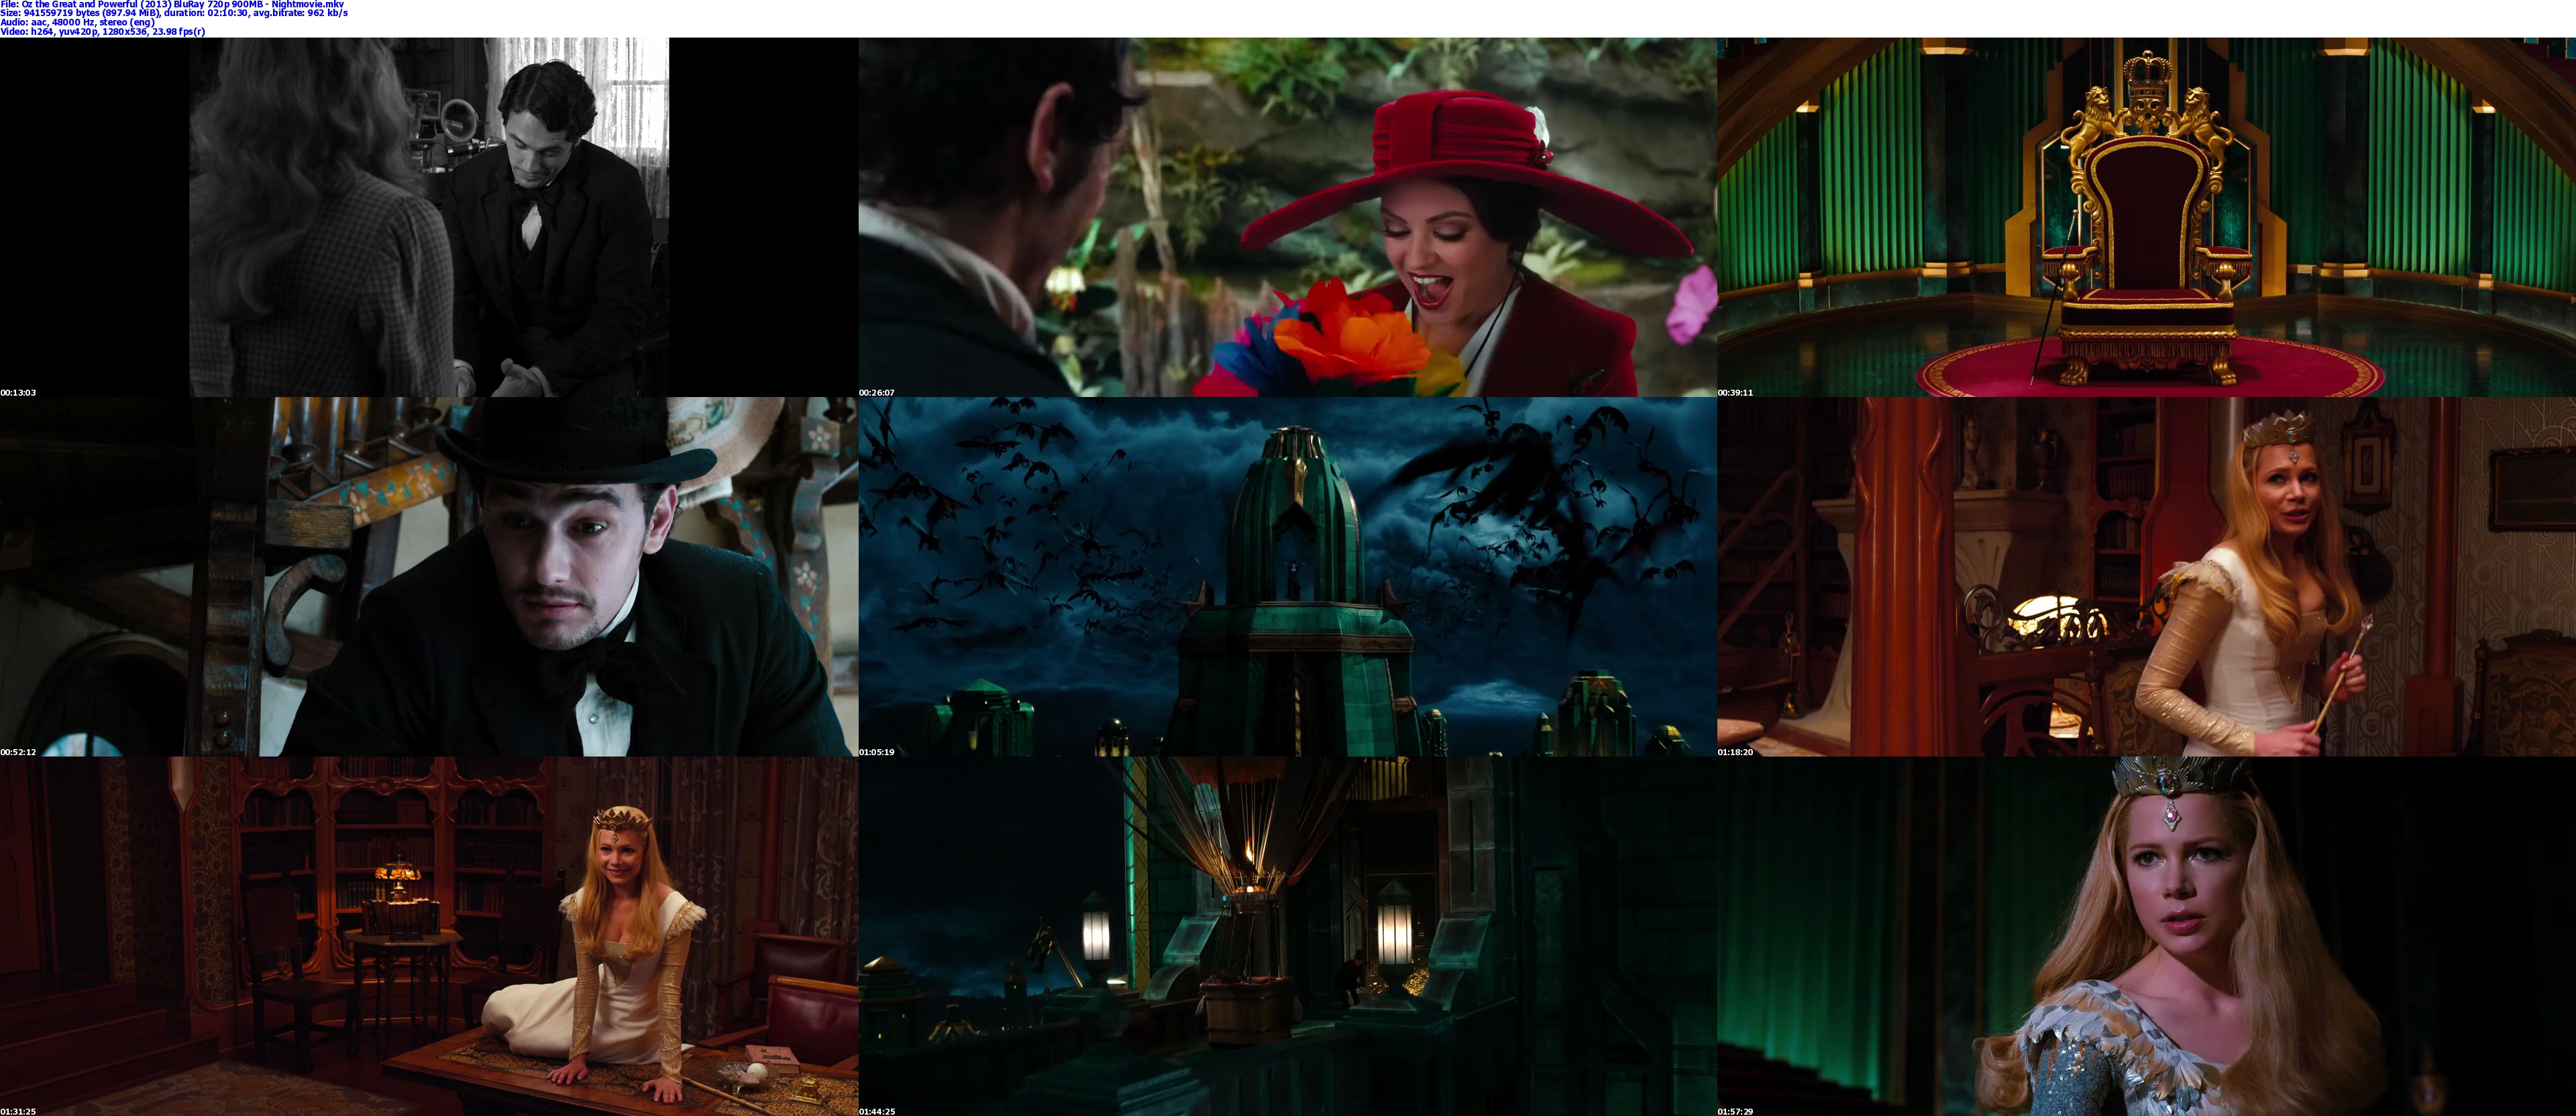 Download Oz the Great and Powerful 2013 YIFY Torrent for